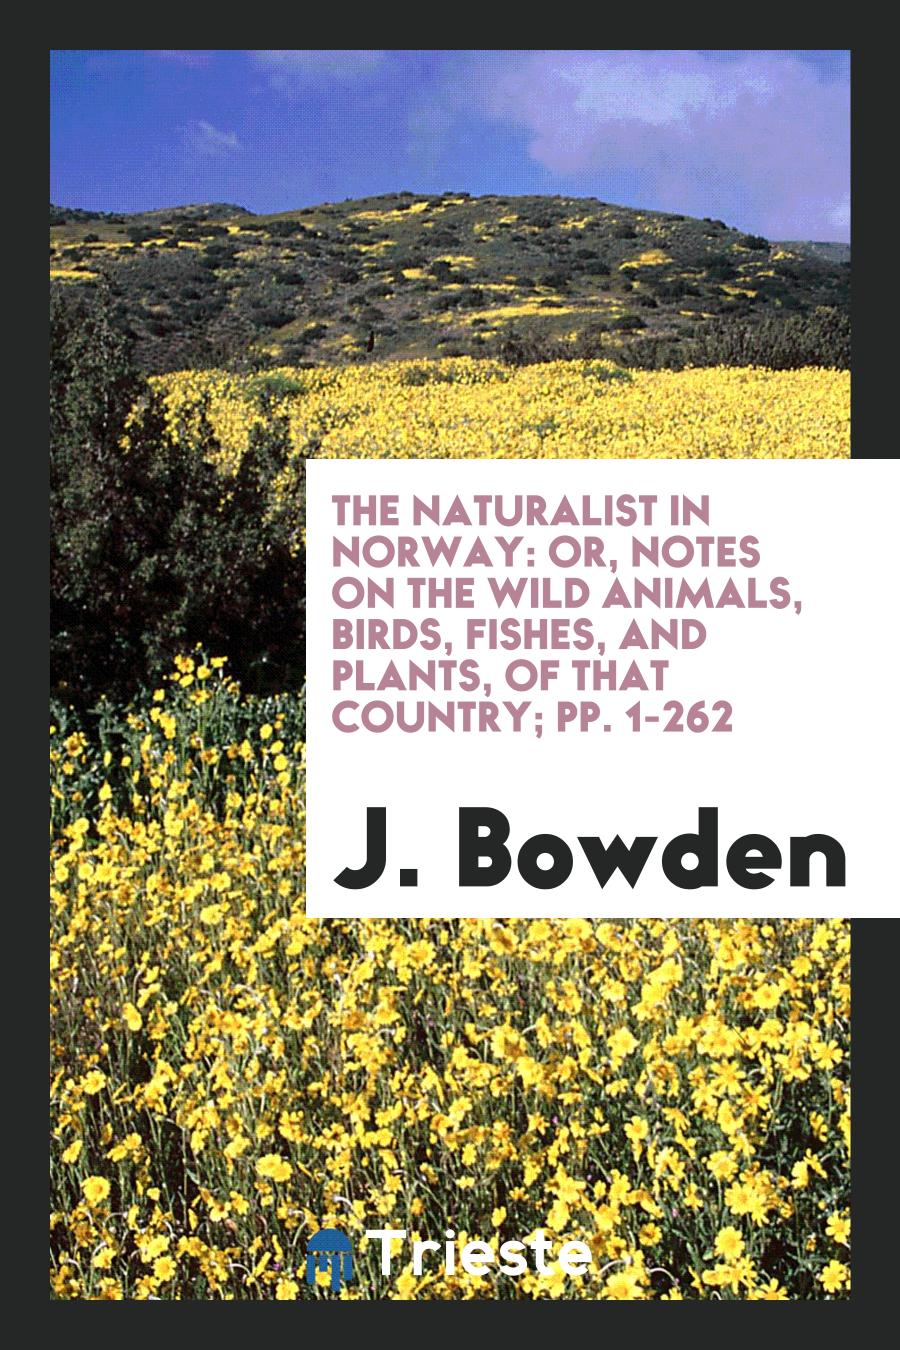 The Naturalist in Norway: Or, Notes on the Wild Animals, Birds, Fishes, and Plants, of That Country; pp. 1-262